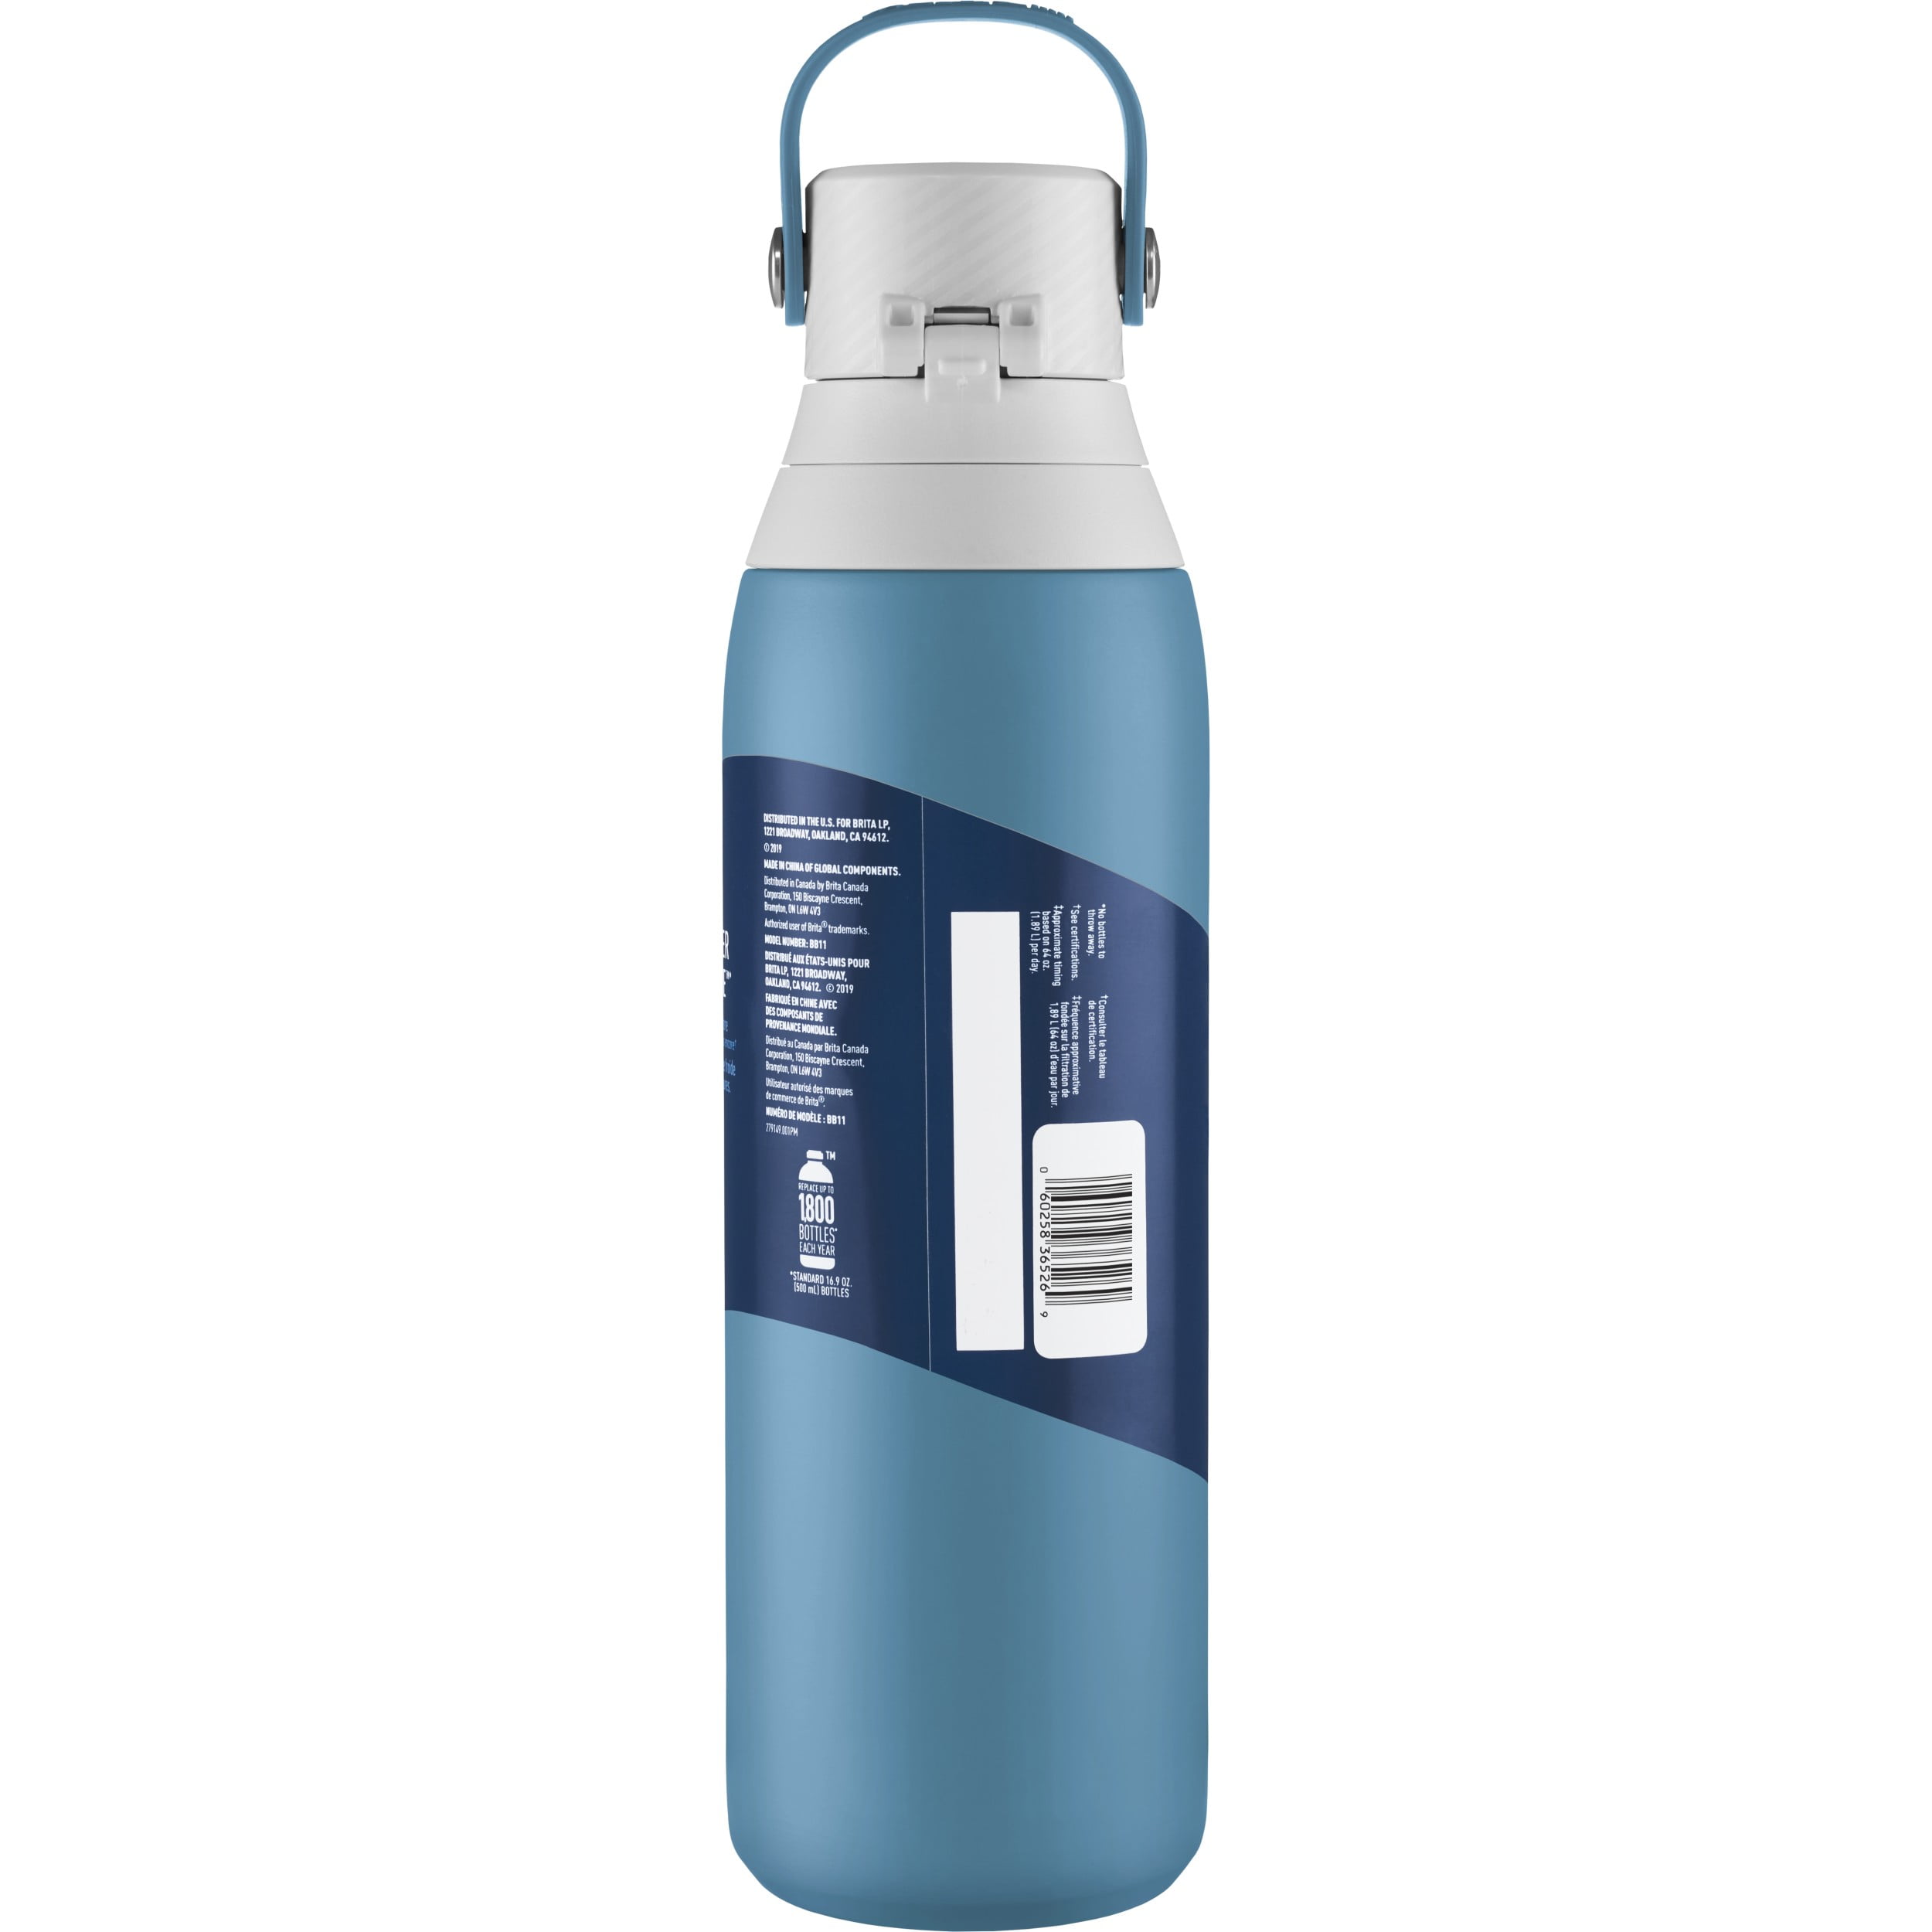  Brita Insulated Filtered Water Bottle with Straw, Reusable,  Stainless Steel Metal, Blue Jay, 20 Ounce: Home & Kitchen